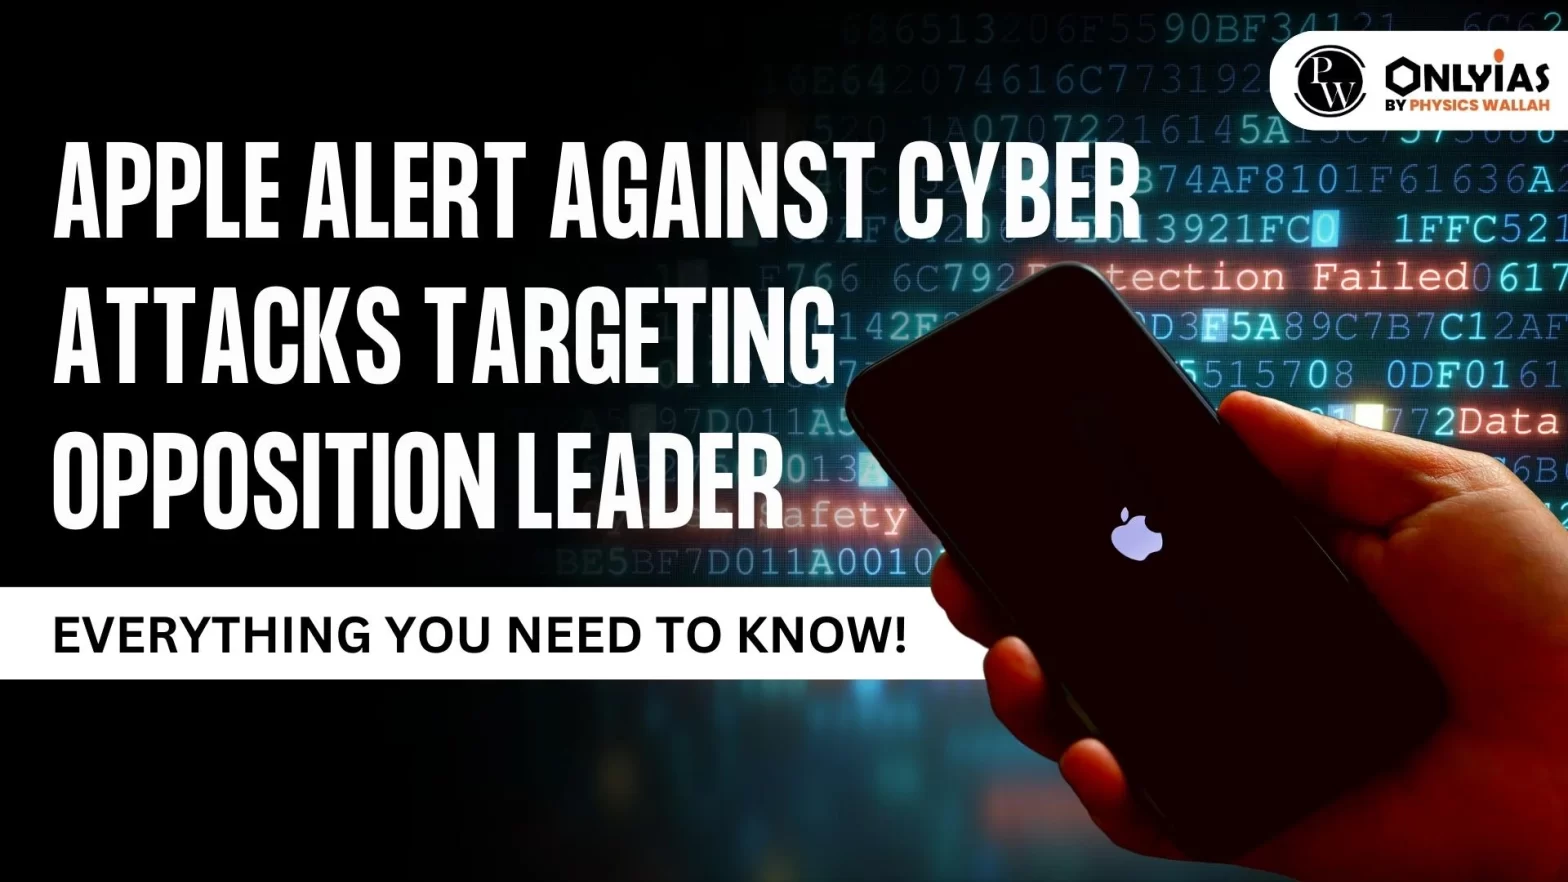 Apple Alert Against Cyber Attacks Targeting Opposition Leader: Everything you need to know!